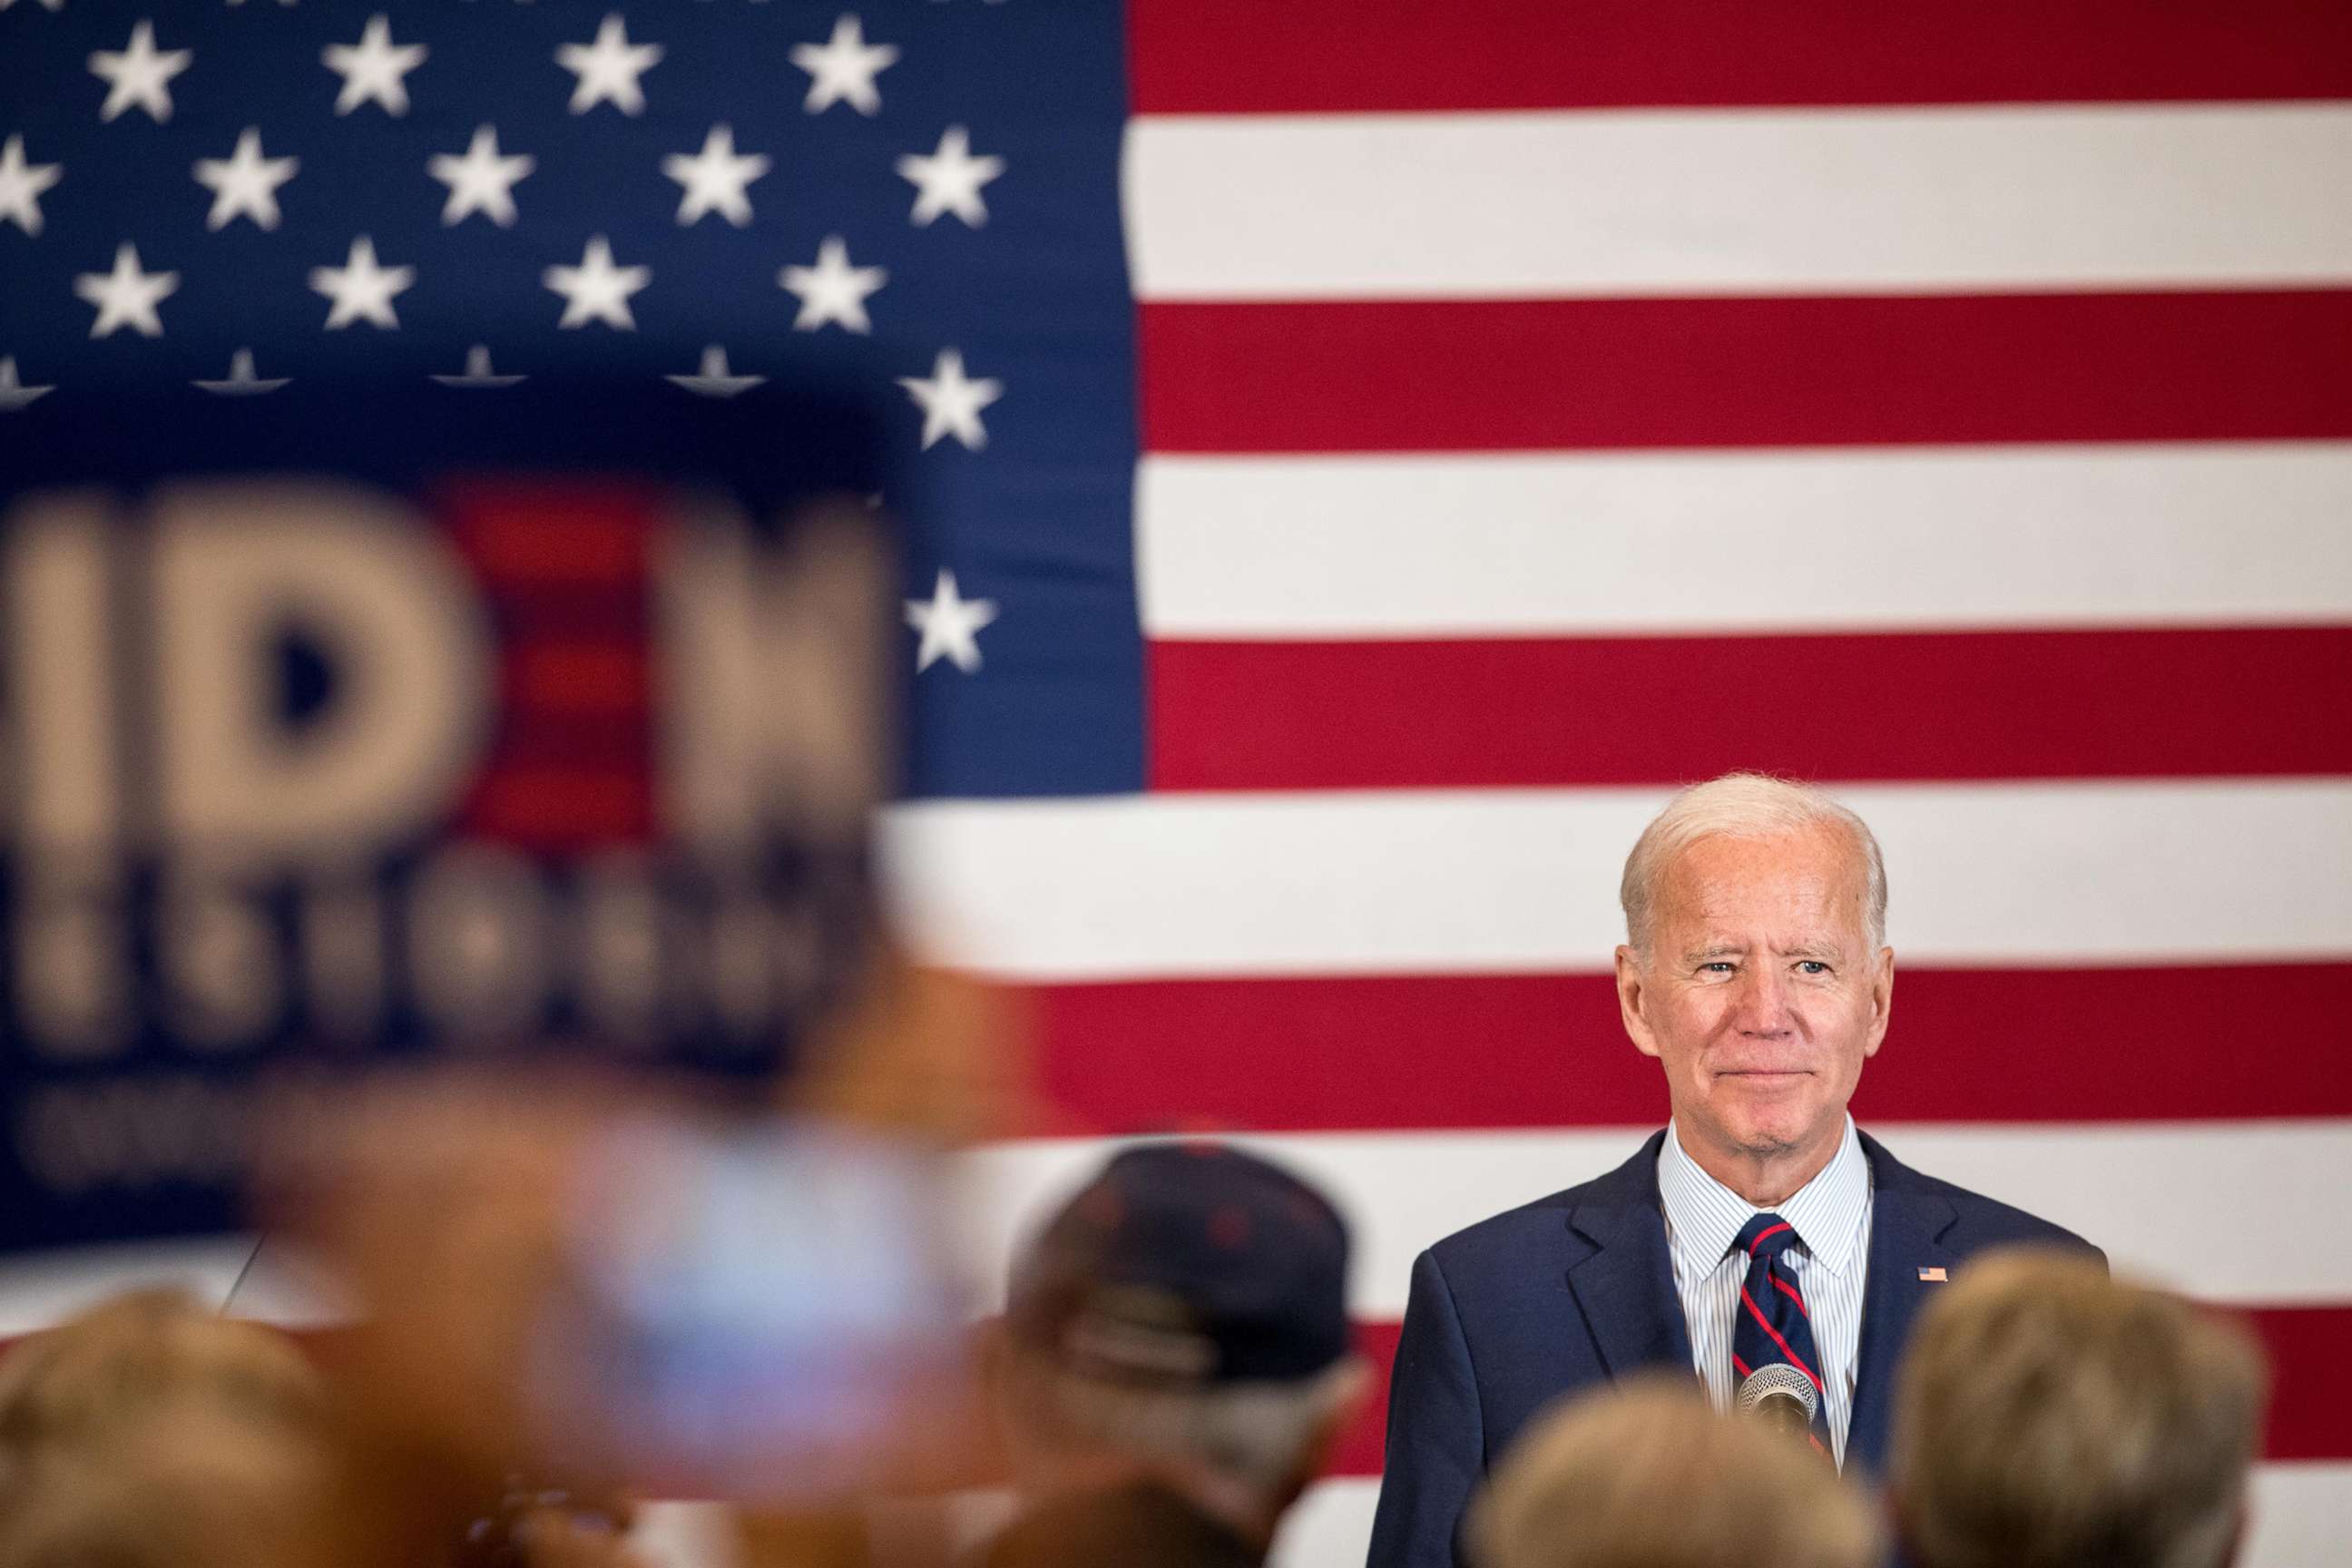 PHOTO: Democratic presidential candidate, former Vice President Joe Biden stands on stage while the crowd applauds during a campaign event on Oct. 9, 2019 in Manchester, N.H.